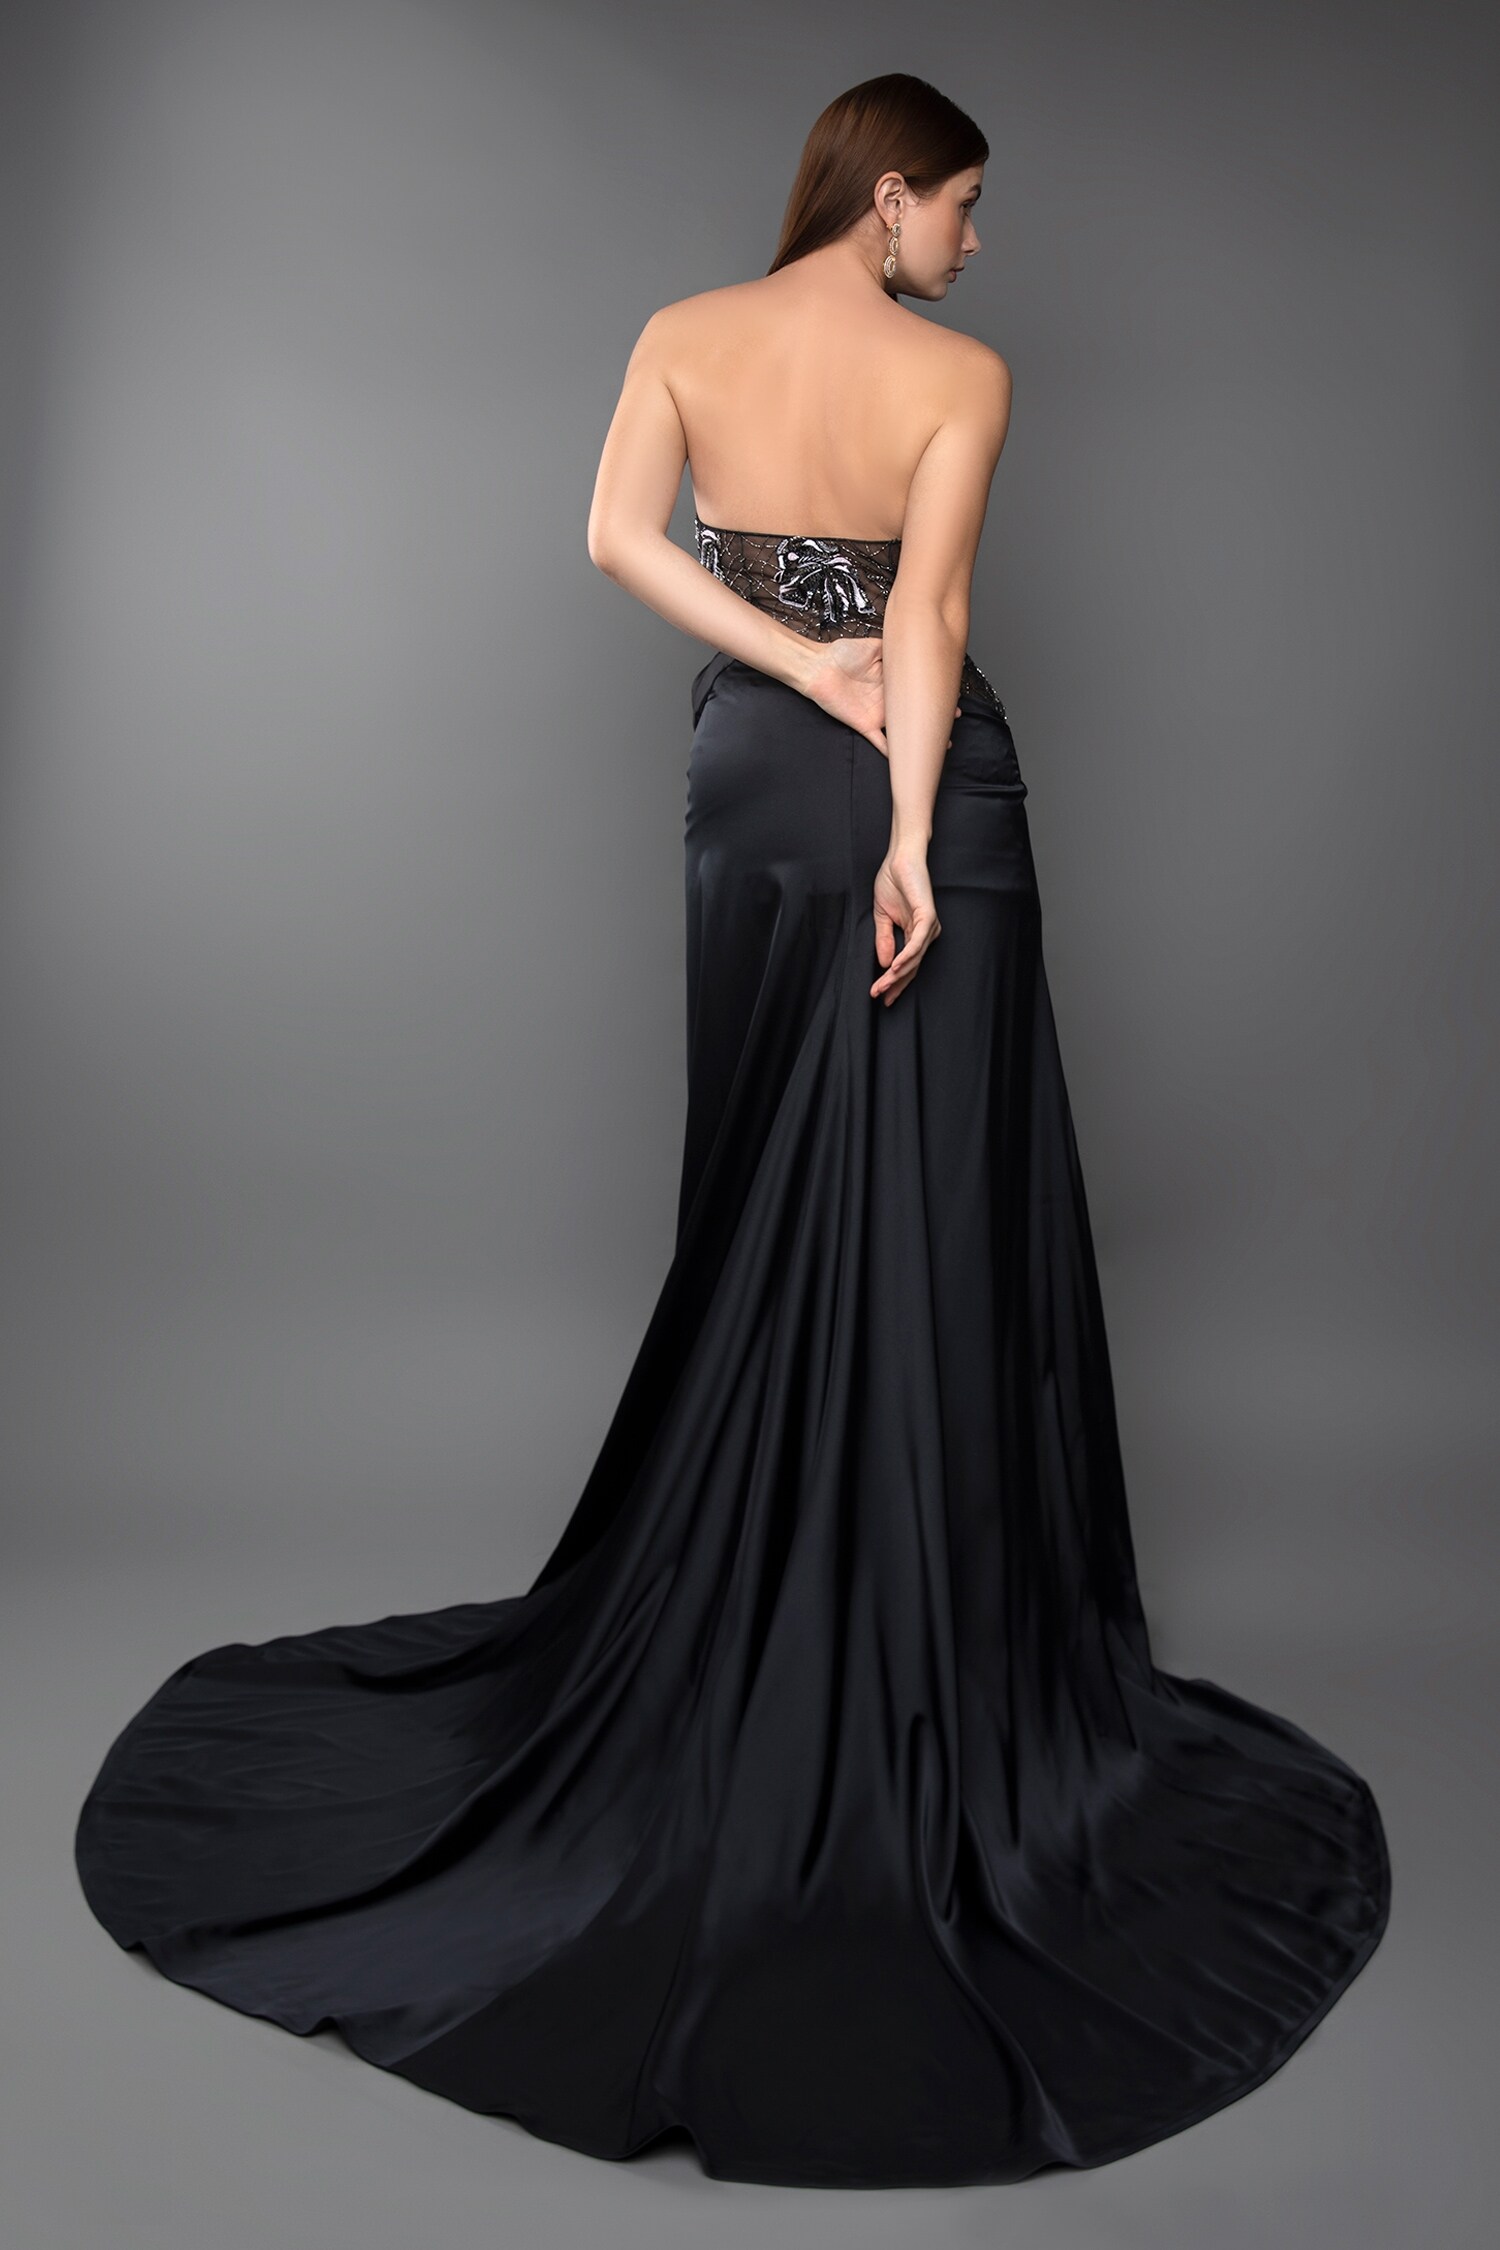 Homdor One Shoulder Satin Prom Dresses Long Ball Gown India | Ubuy